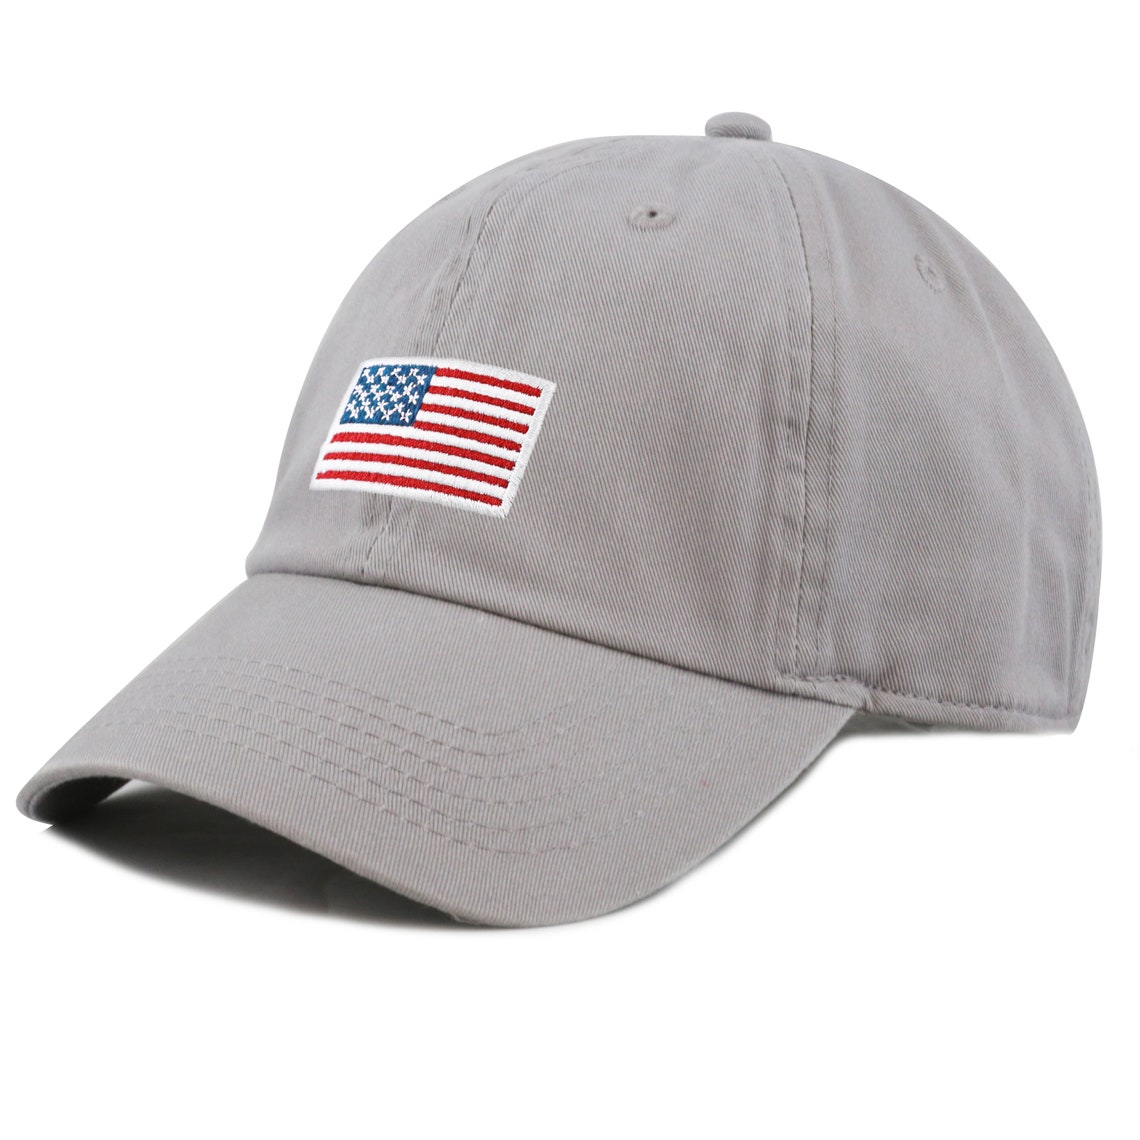 American Flag Embroidered Washed Cotton Baseball Cap - Etsy